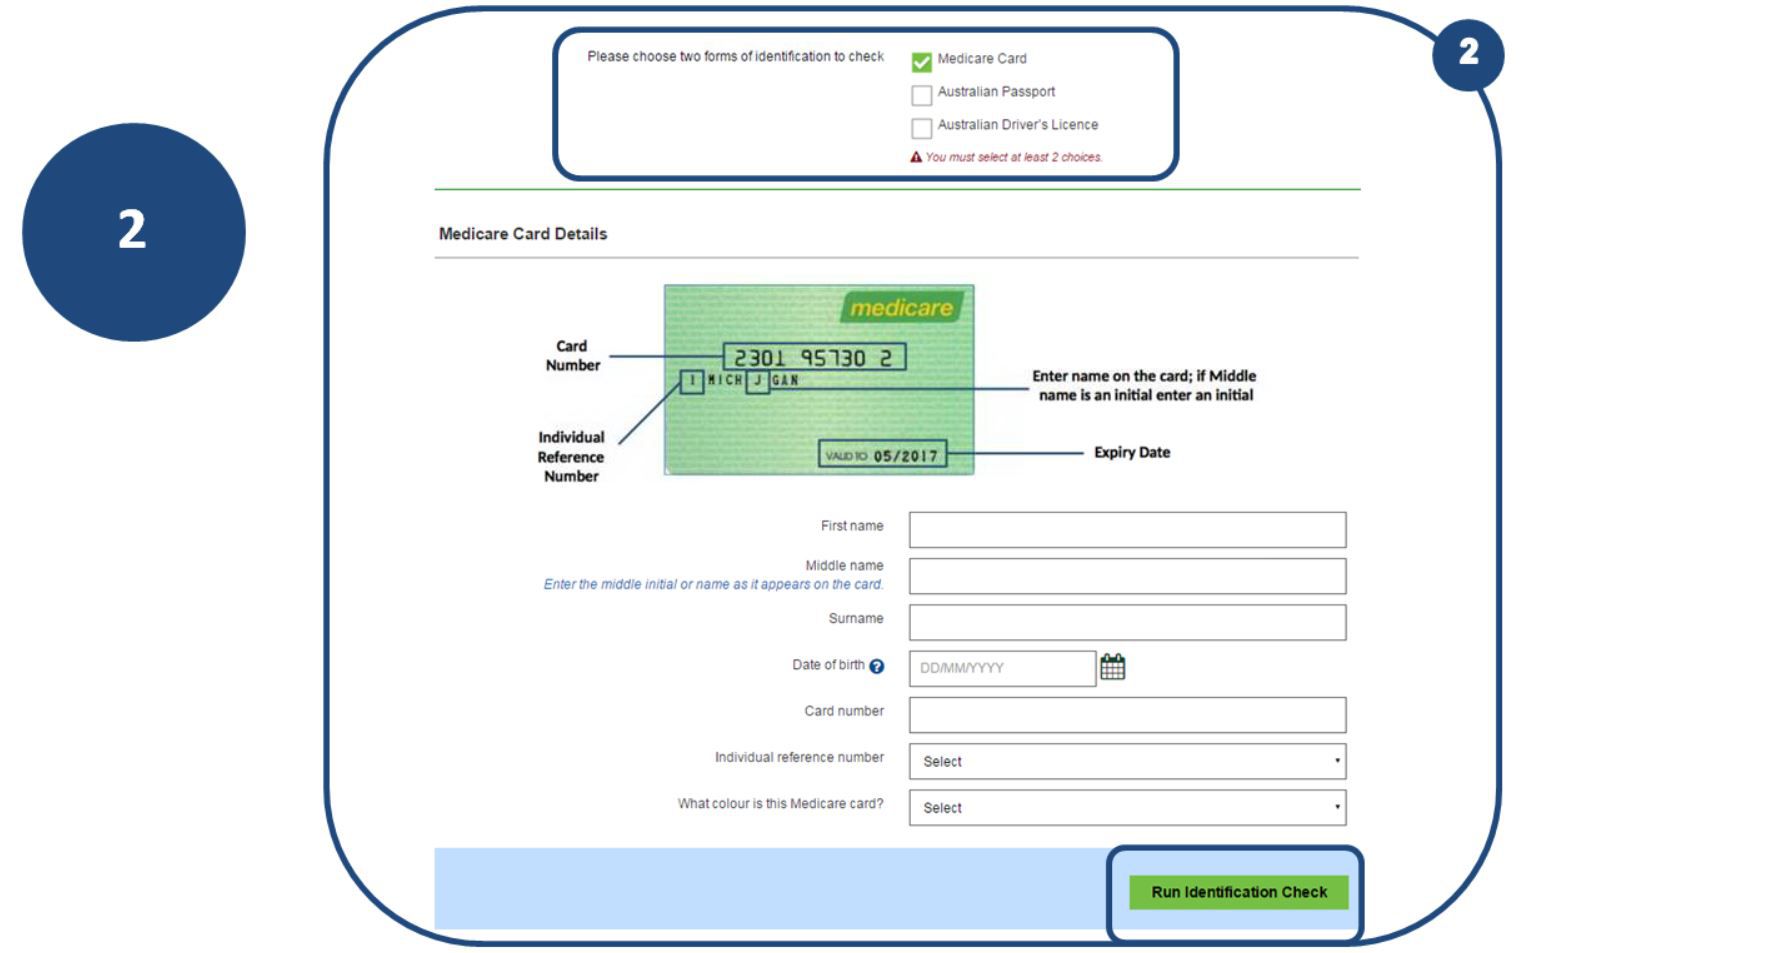 2 When you select the form of identification that you will be using, the required fields will appear